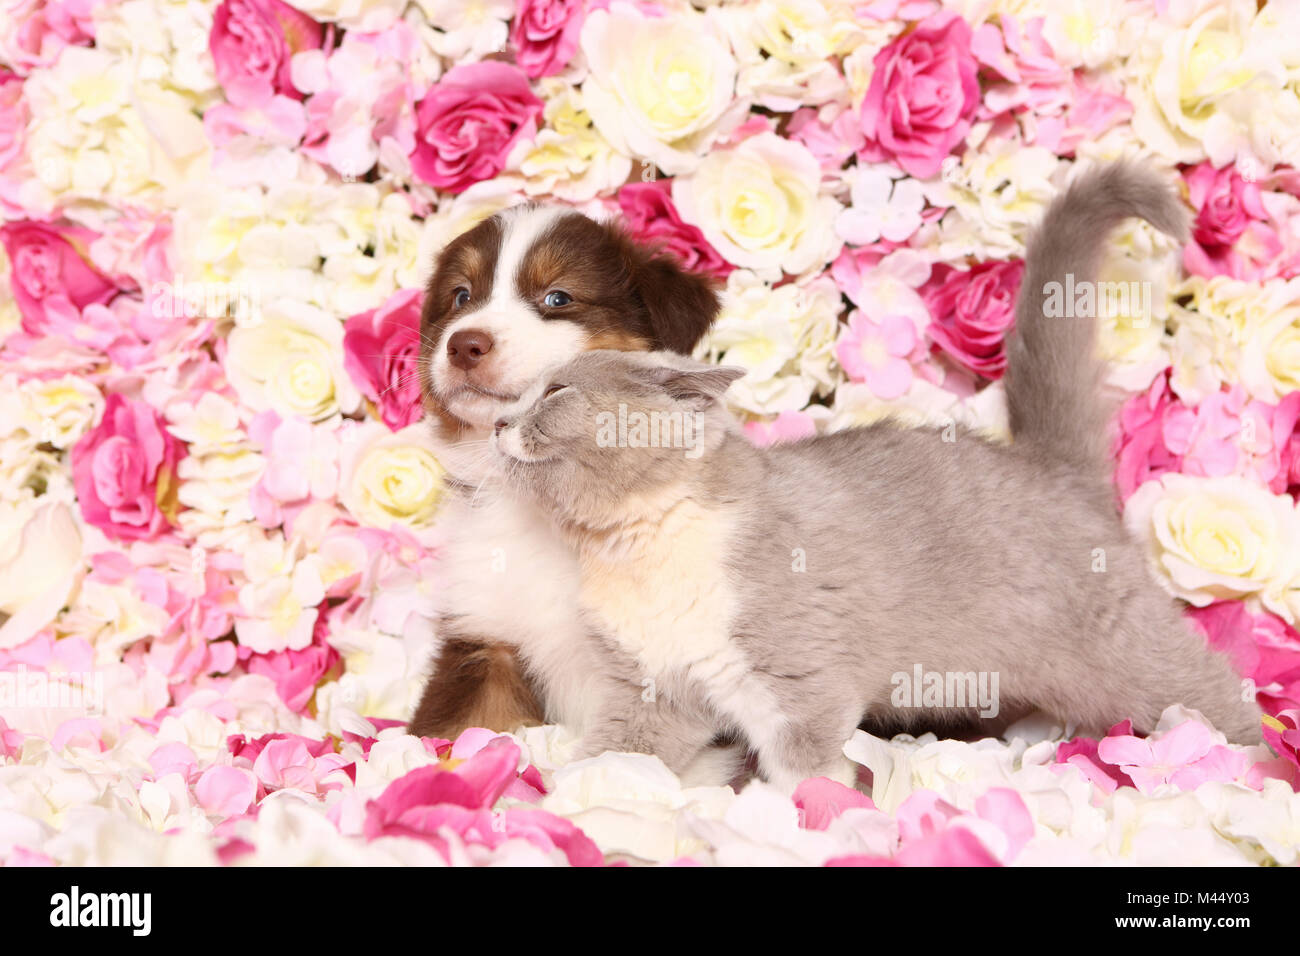 Australian Shepherd and British Shorthair Cat. Puppy (6 weeks old) and kitten smoothing among rose flowers. Studio picture. Germany Stock Photo